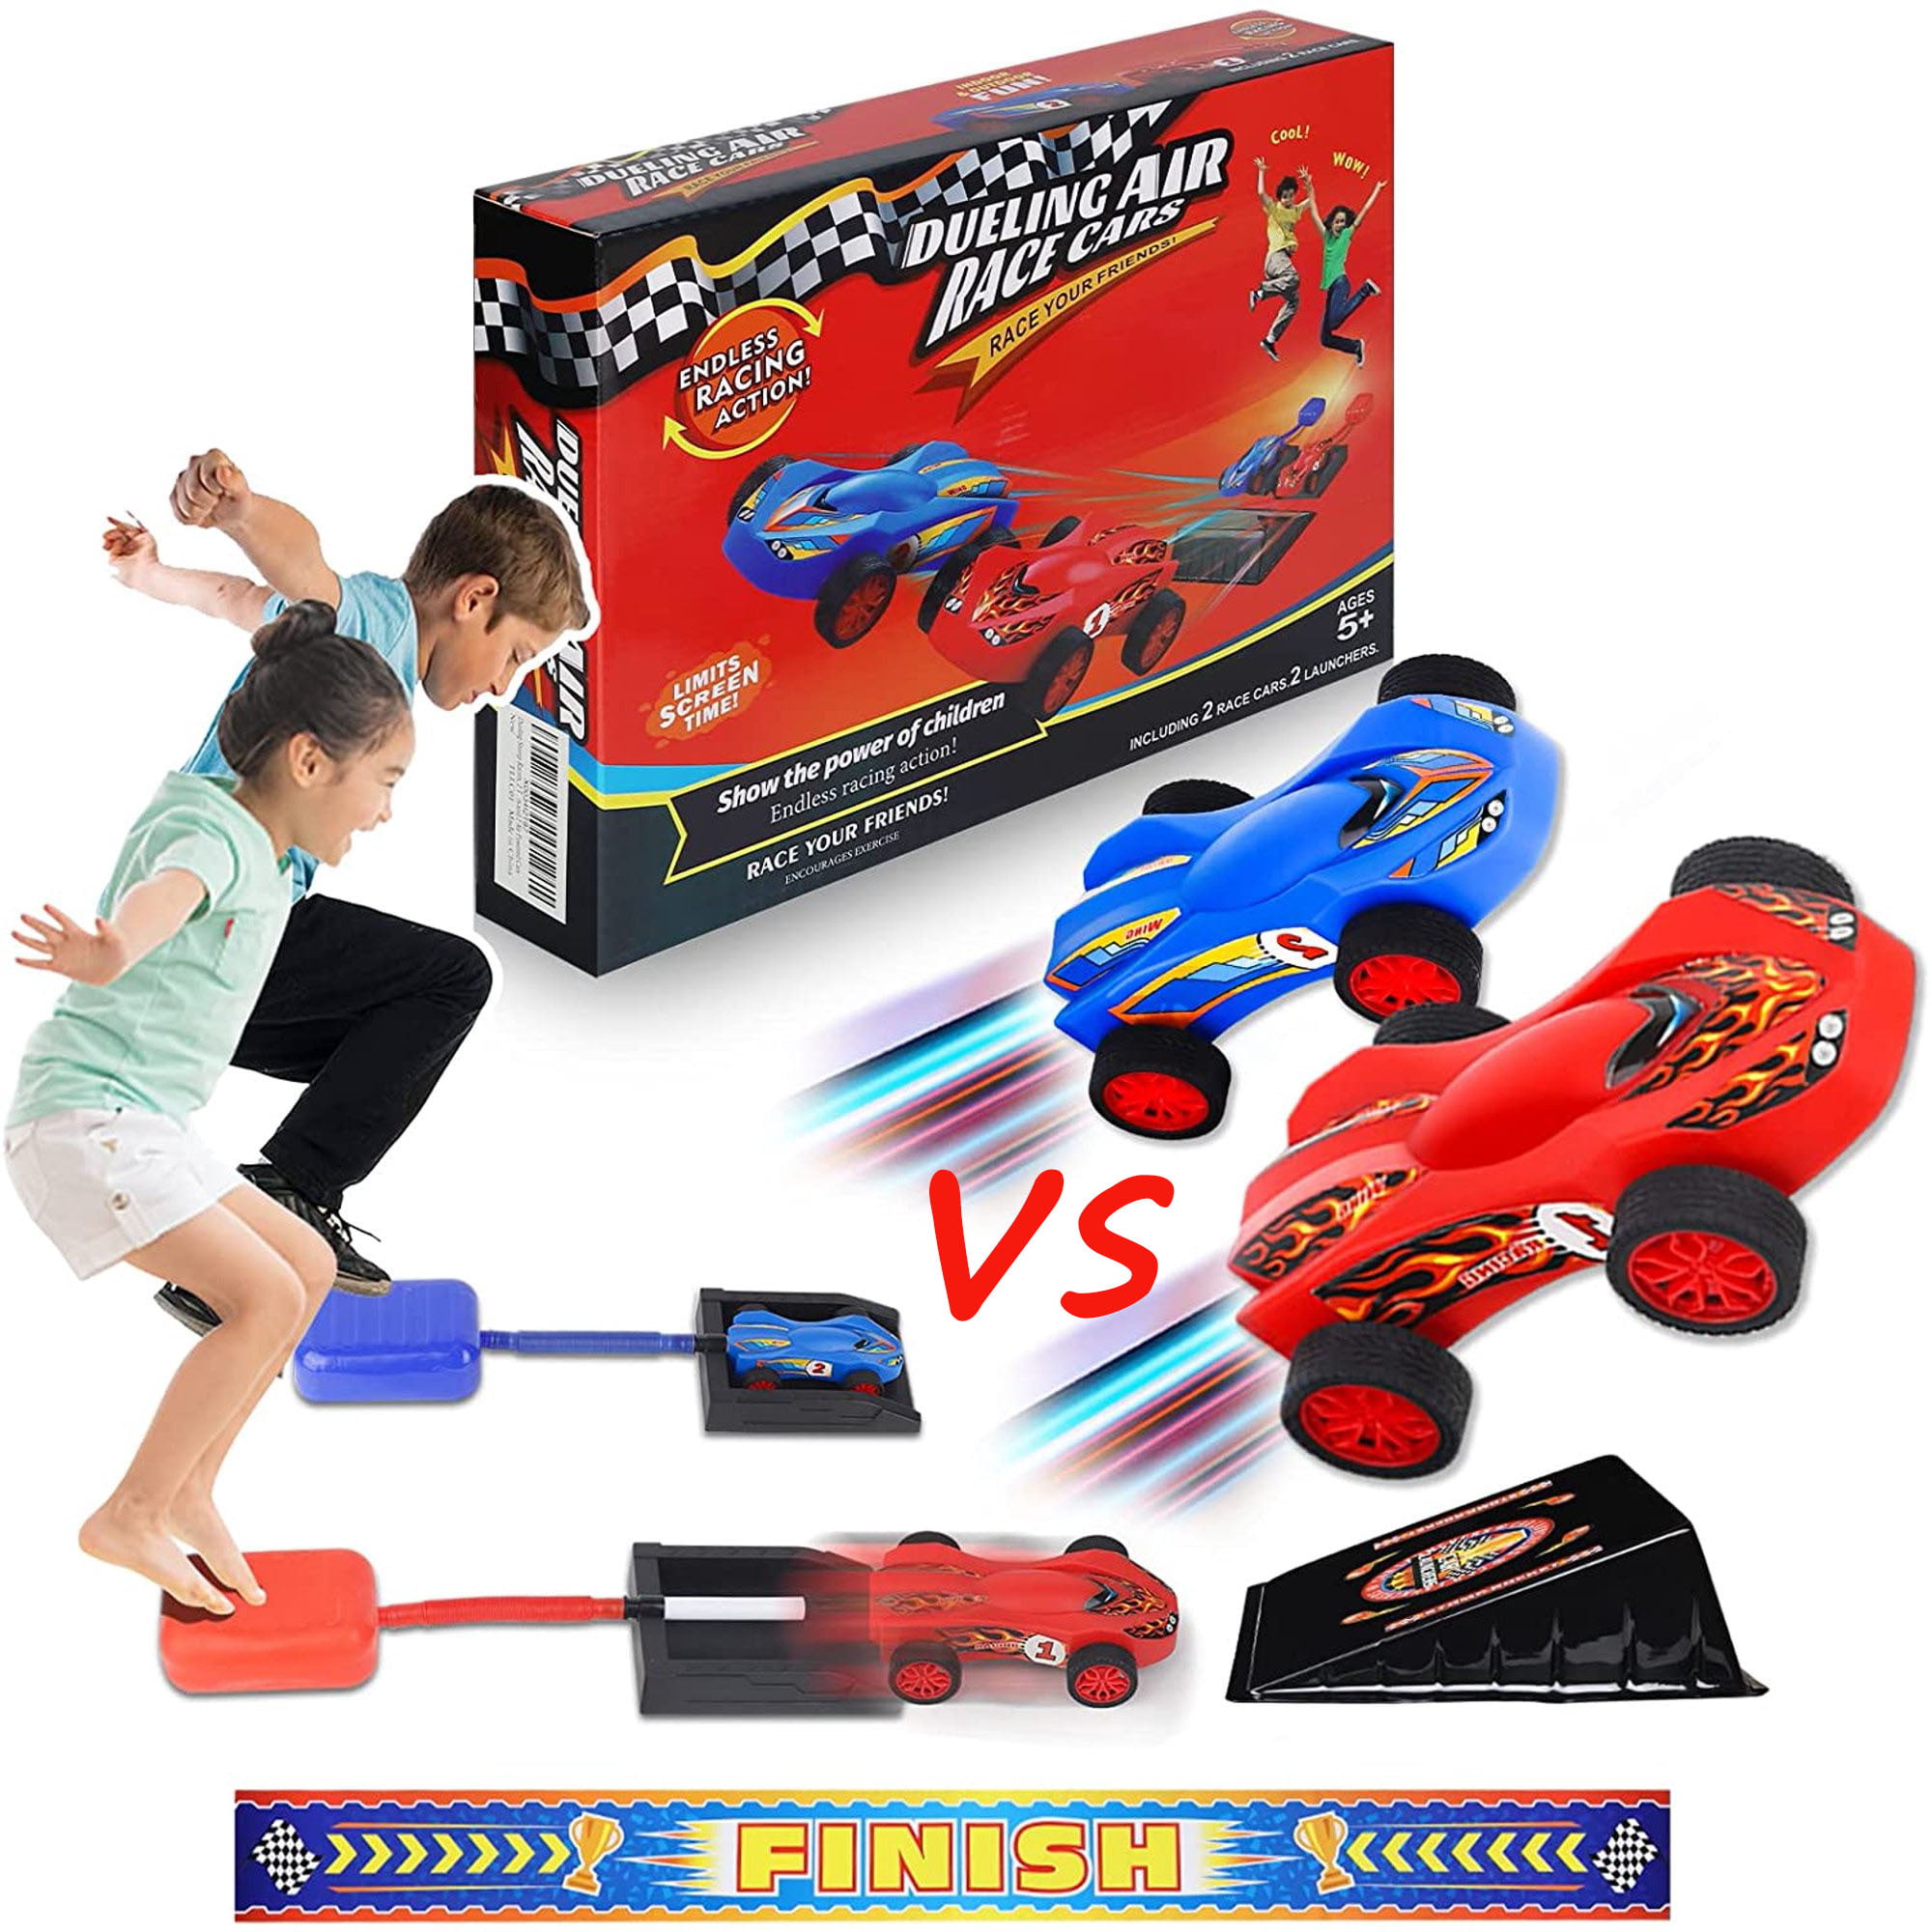 Stomp Dueling Racers,Outdoor Toy,Birthday Gift for Kids,Toys for Boys 8 to 11 Years,Air Powered Outdoor Toy Cars for Boys and Girls,2 Toy Car Launchers and 2 Air Powered Cars with Ramp and Finish Line